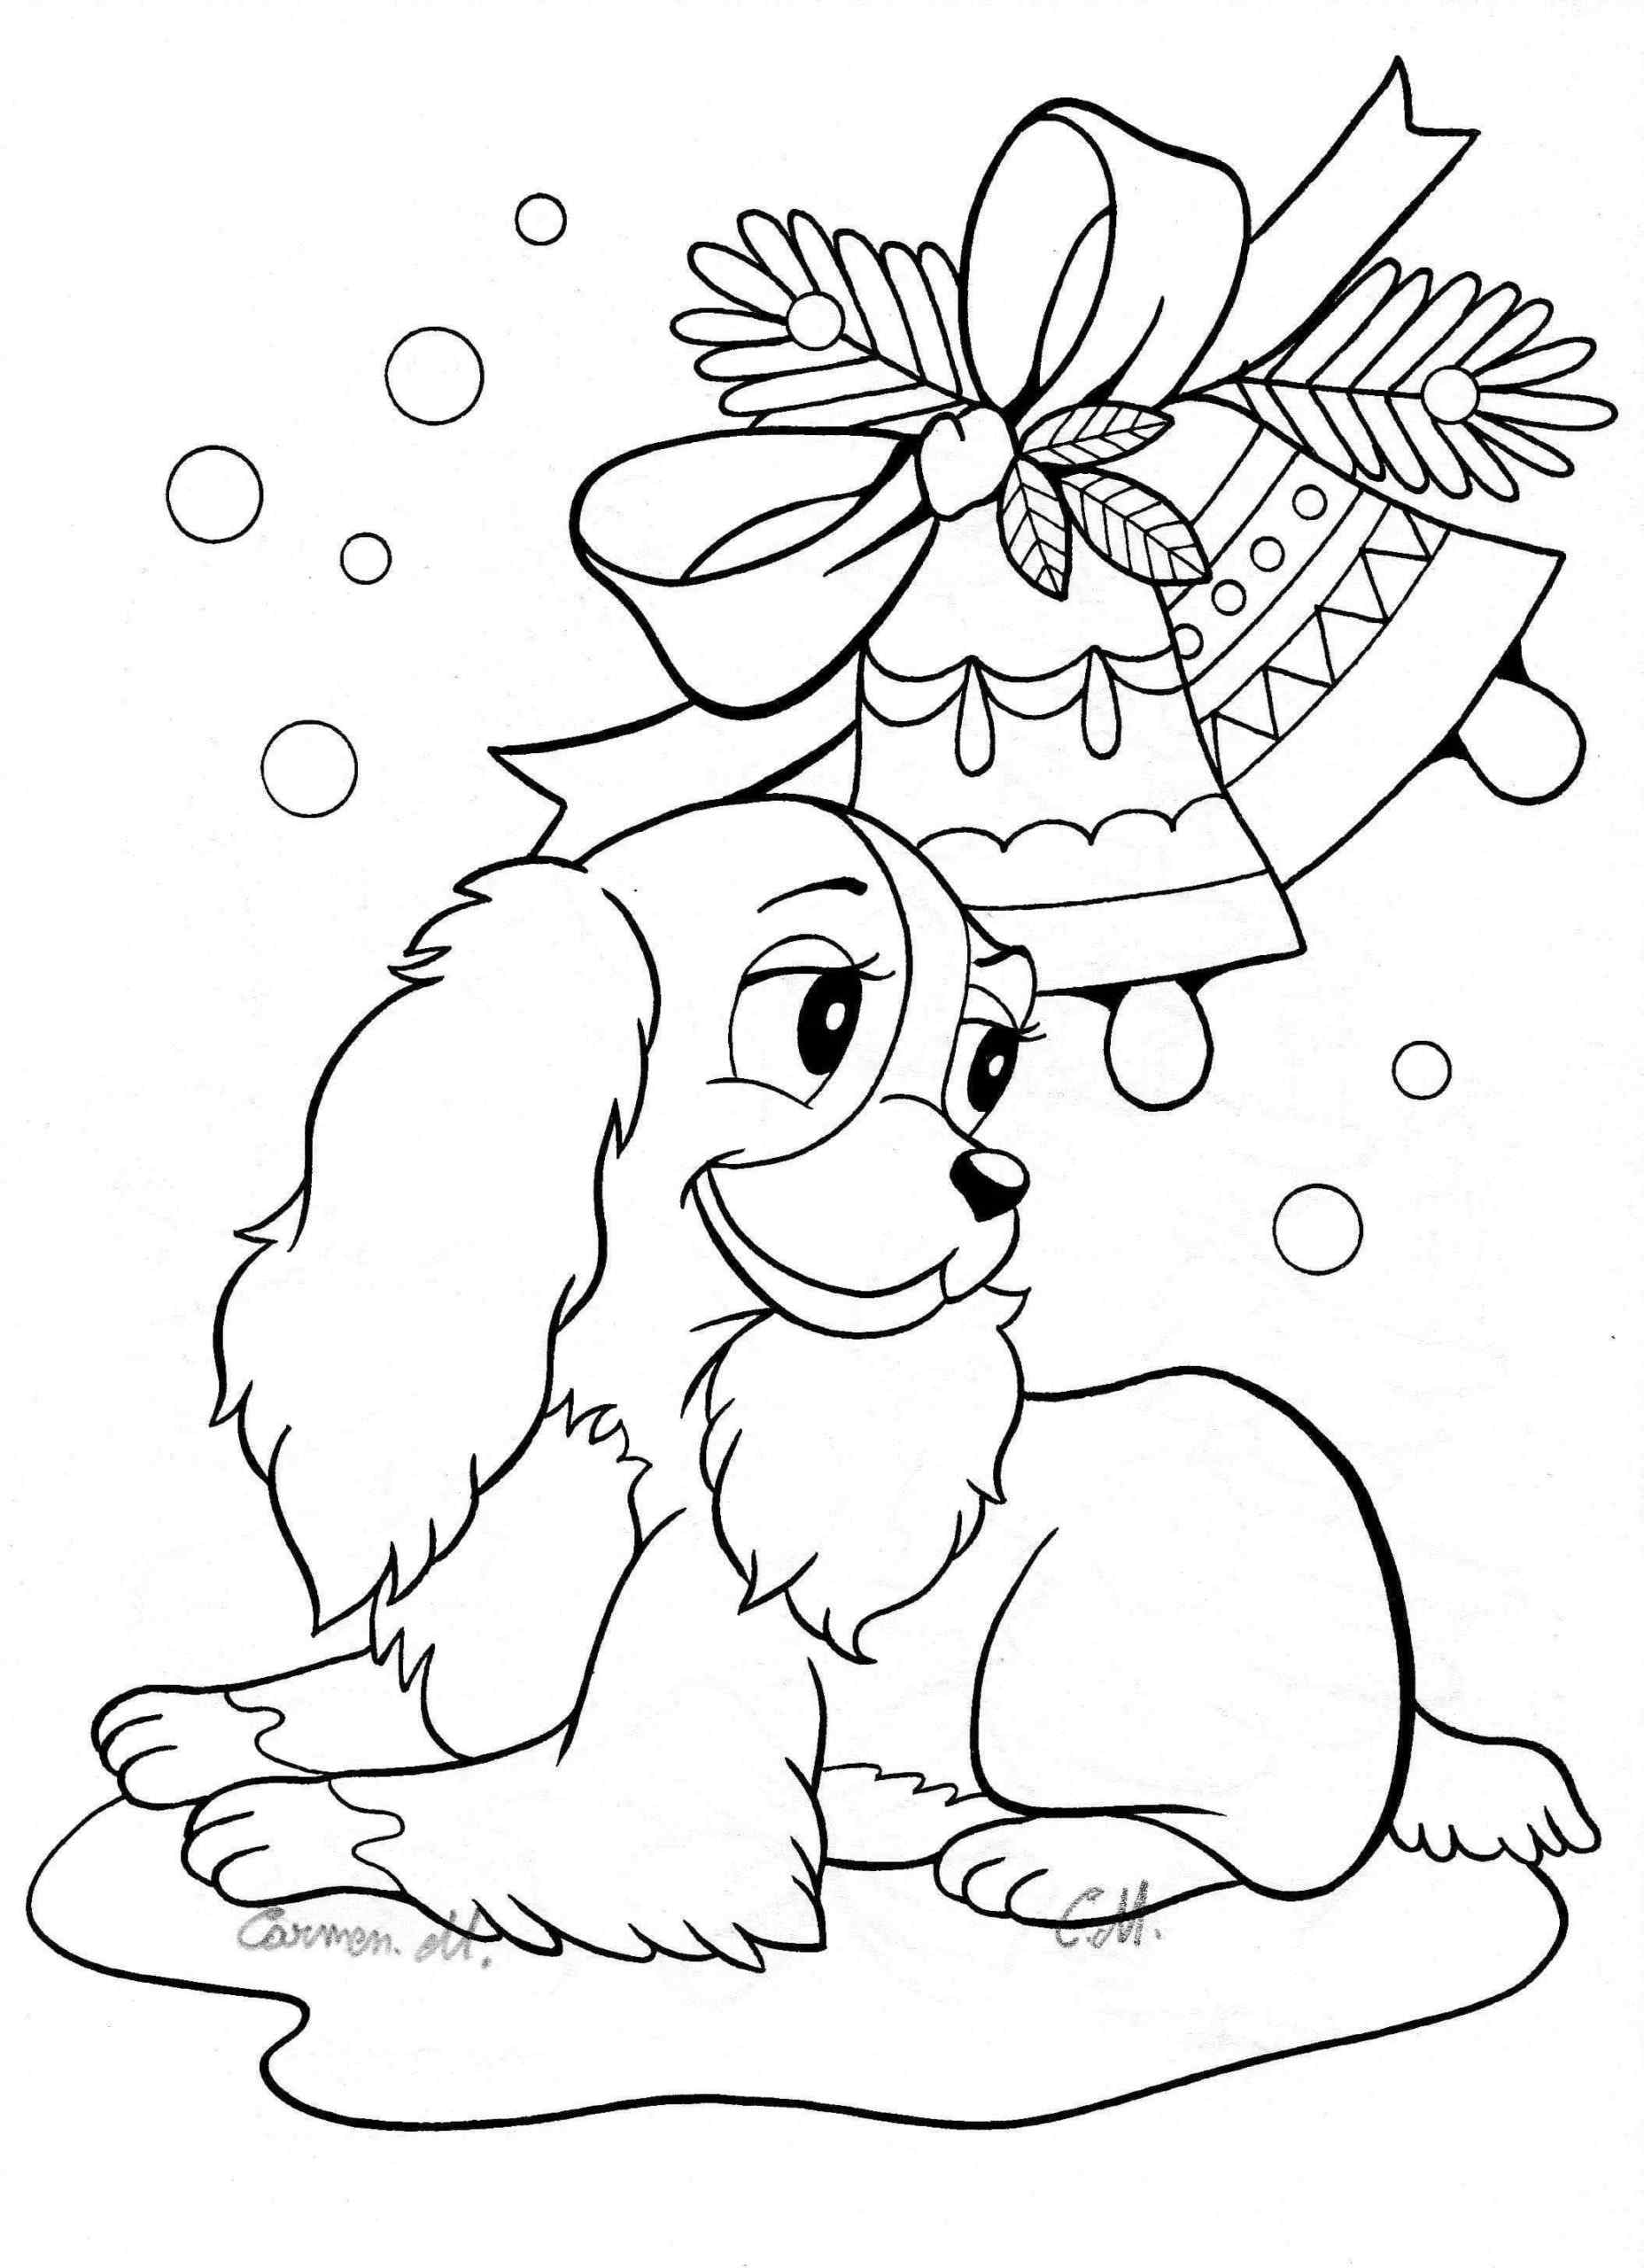 The Most Magical Holiday Coloring Page